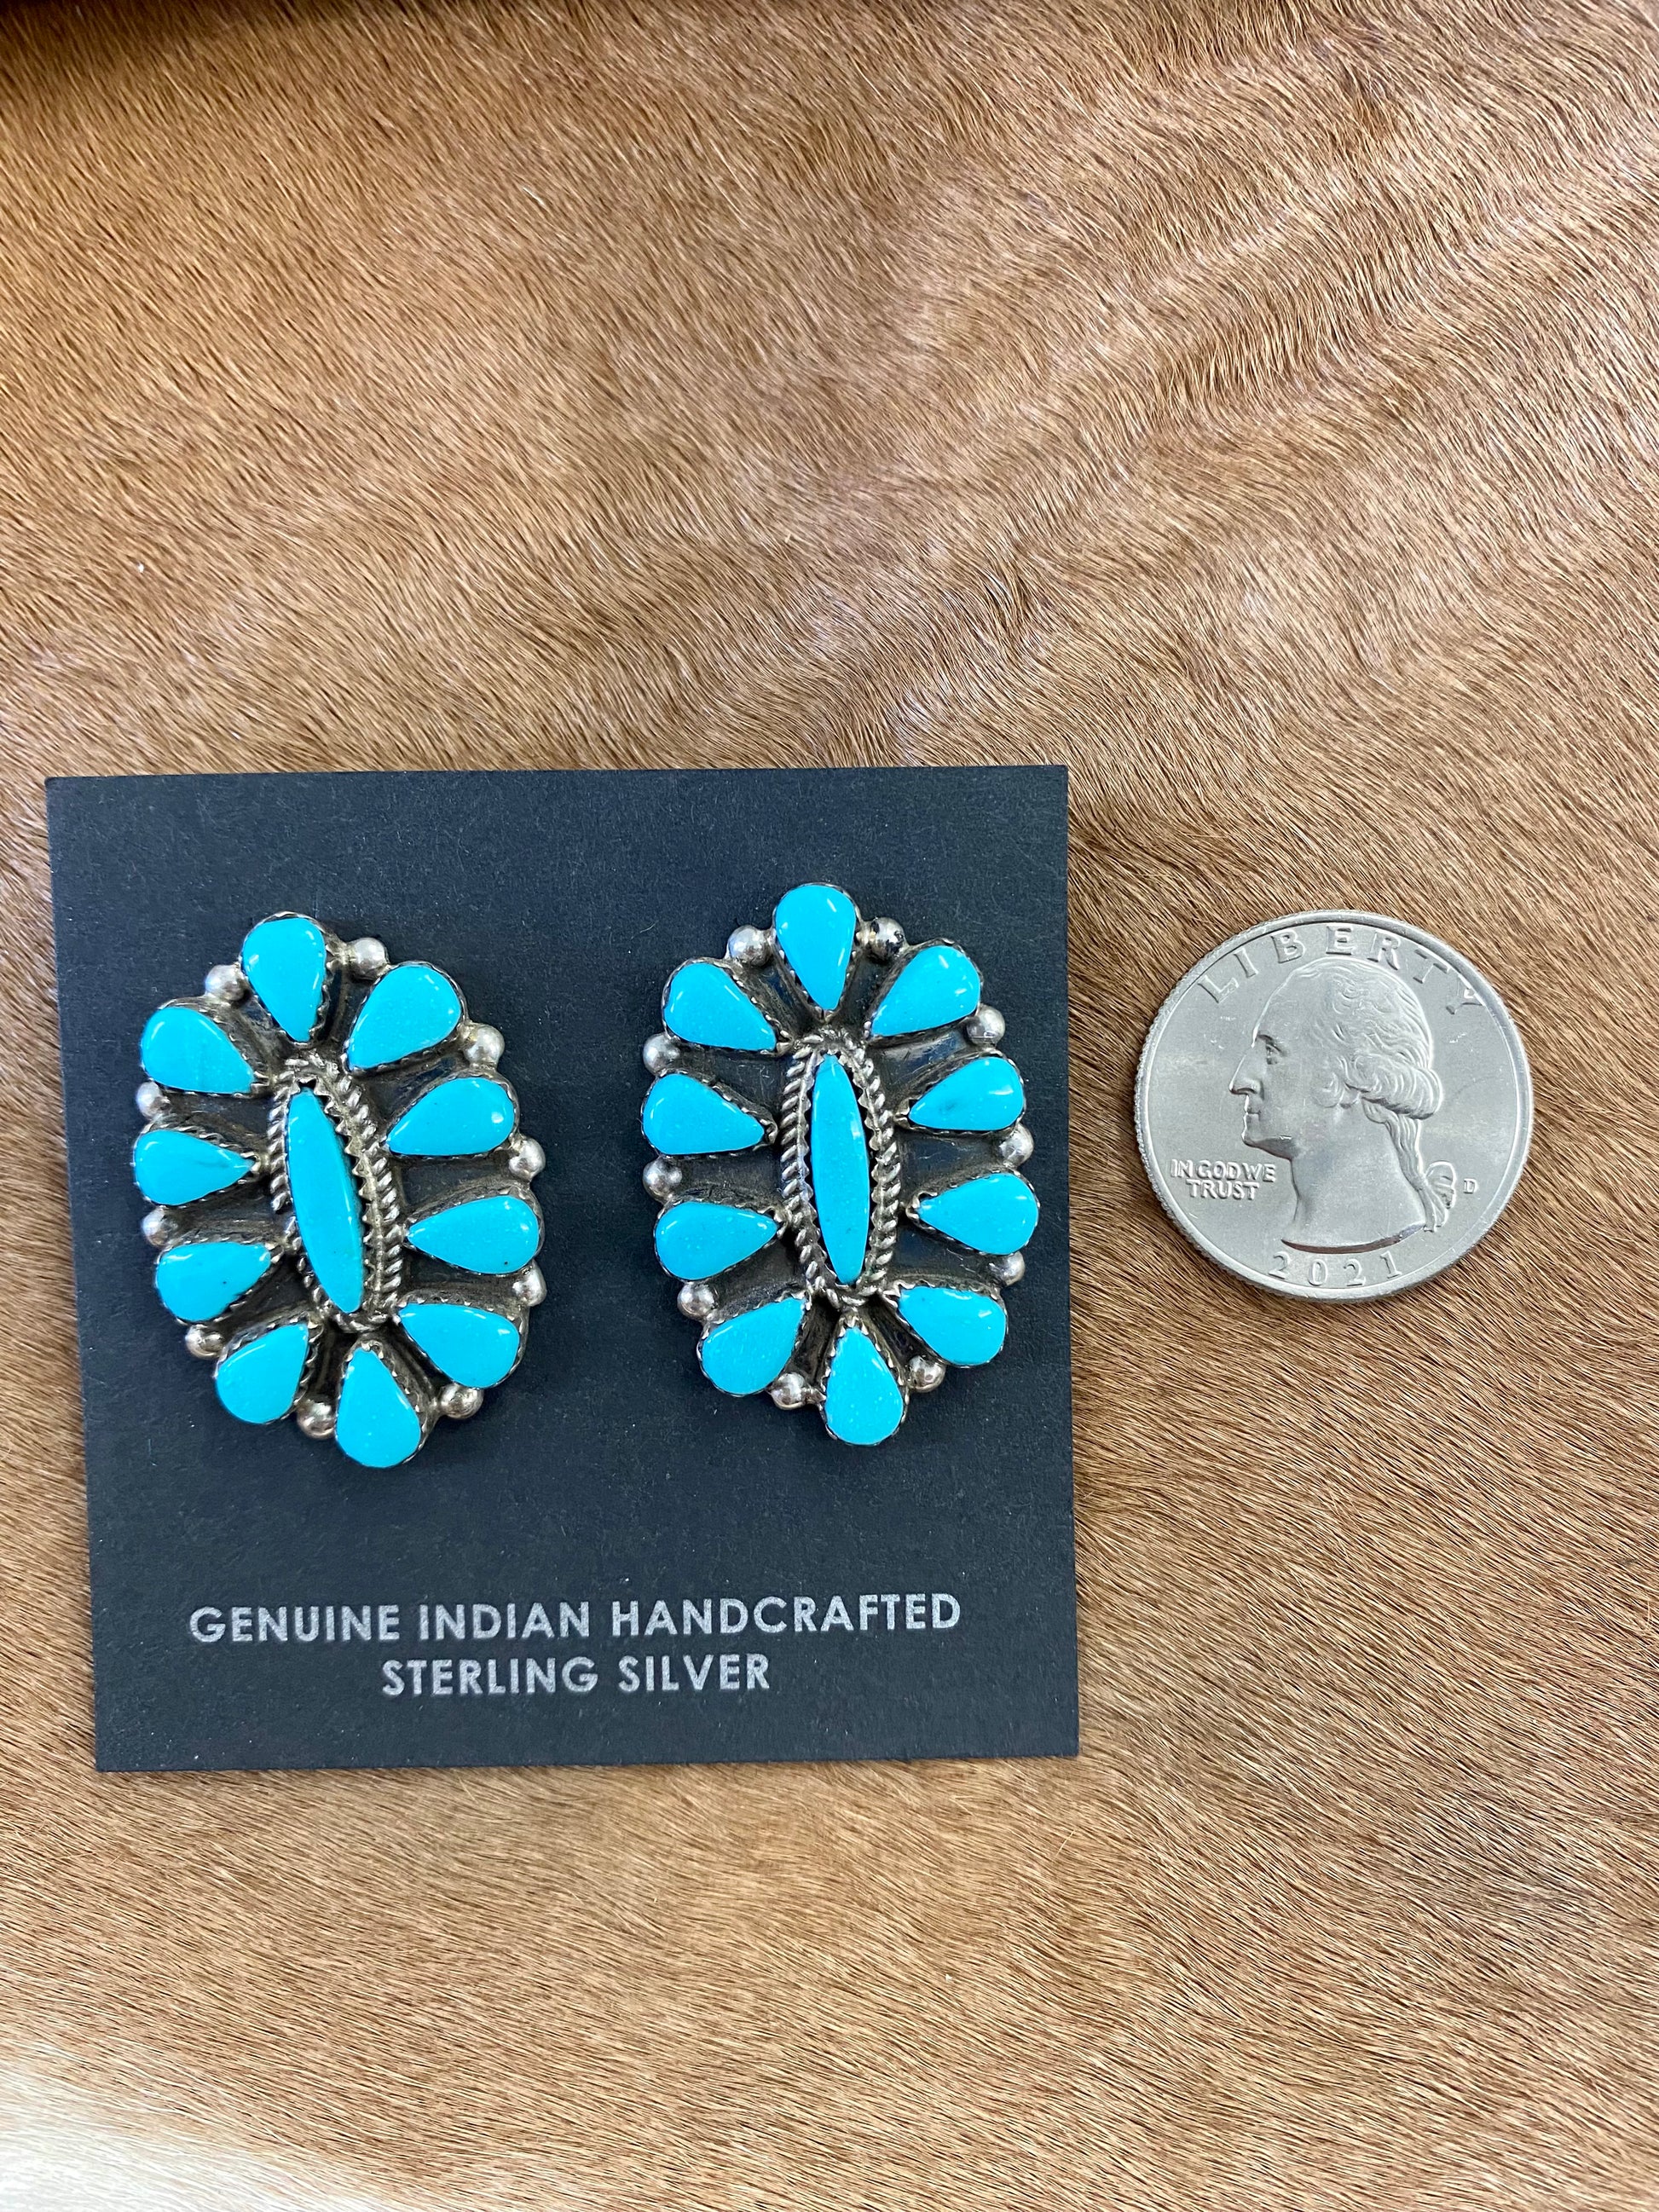 Turquoise Cluster Earrings